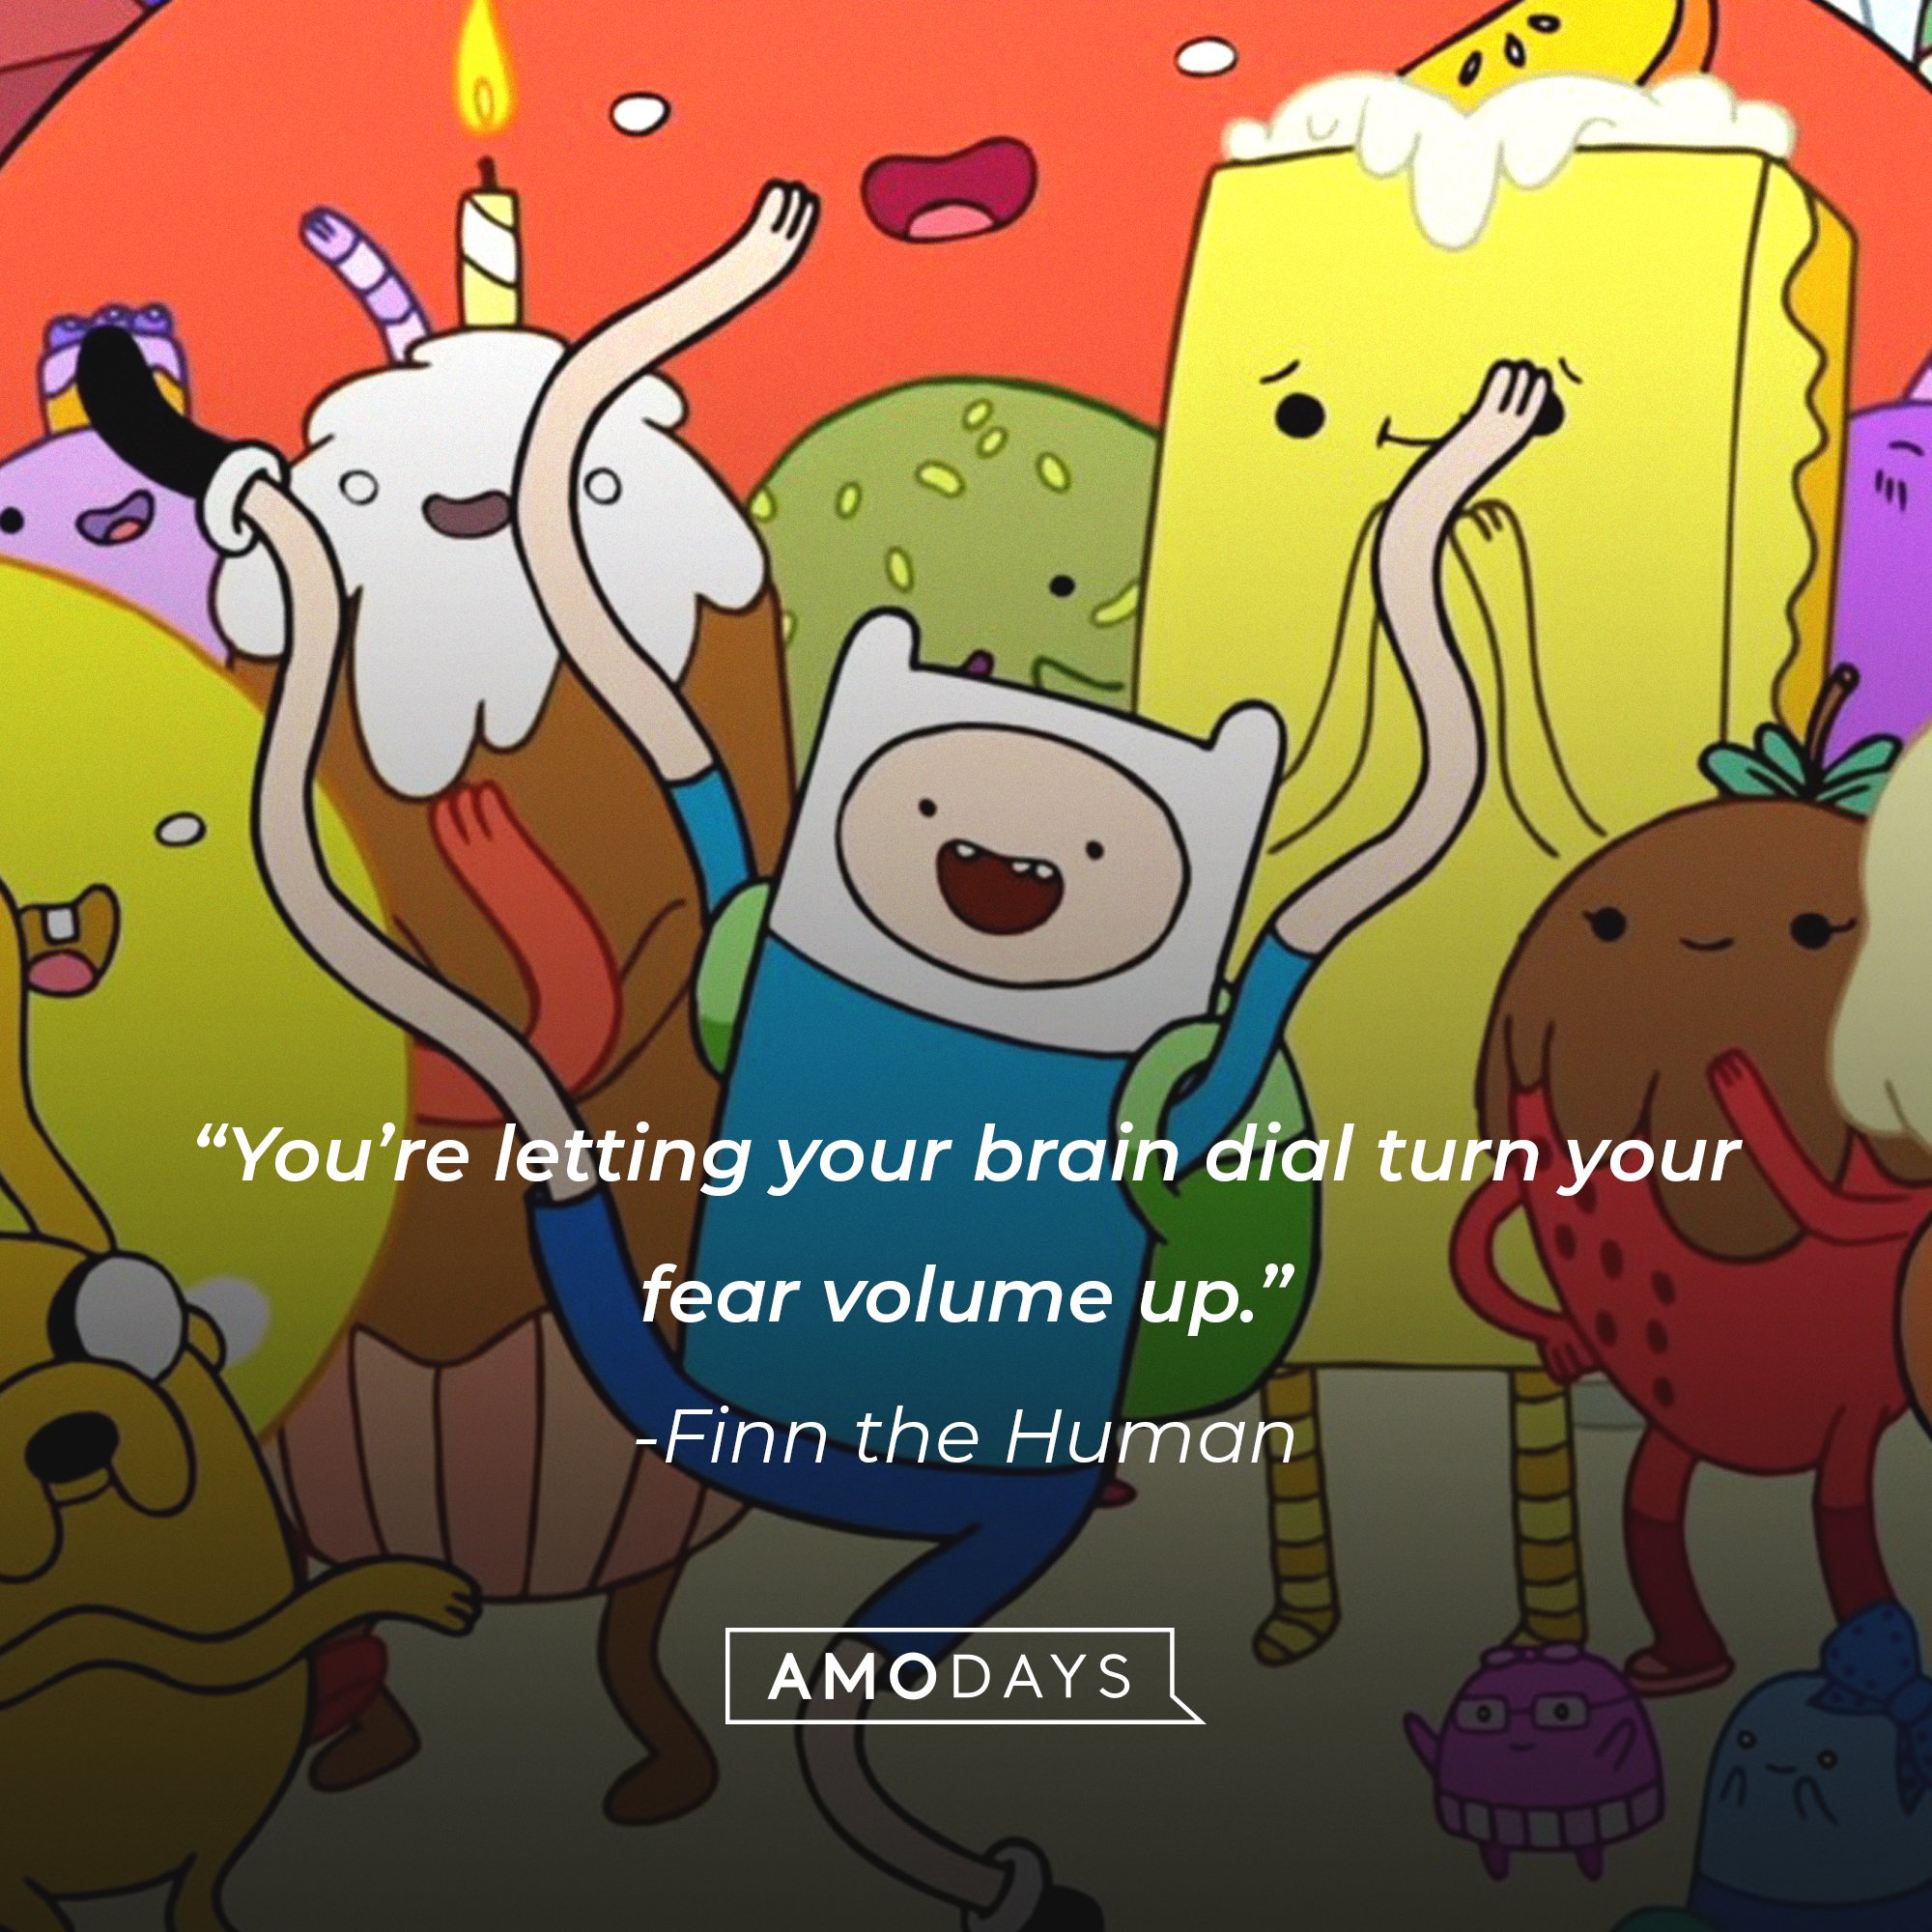   Finn the Human’s quote: “You’re letting your brain dial turn your fear volume up.” | Image: AmoDays